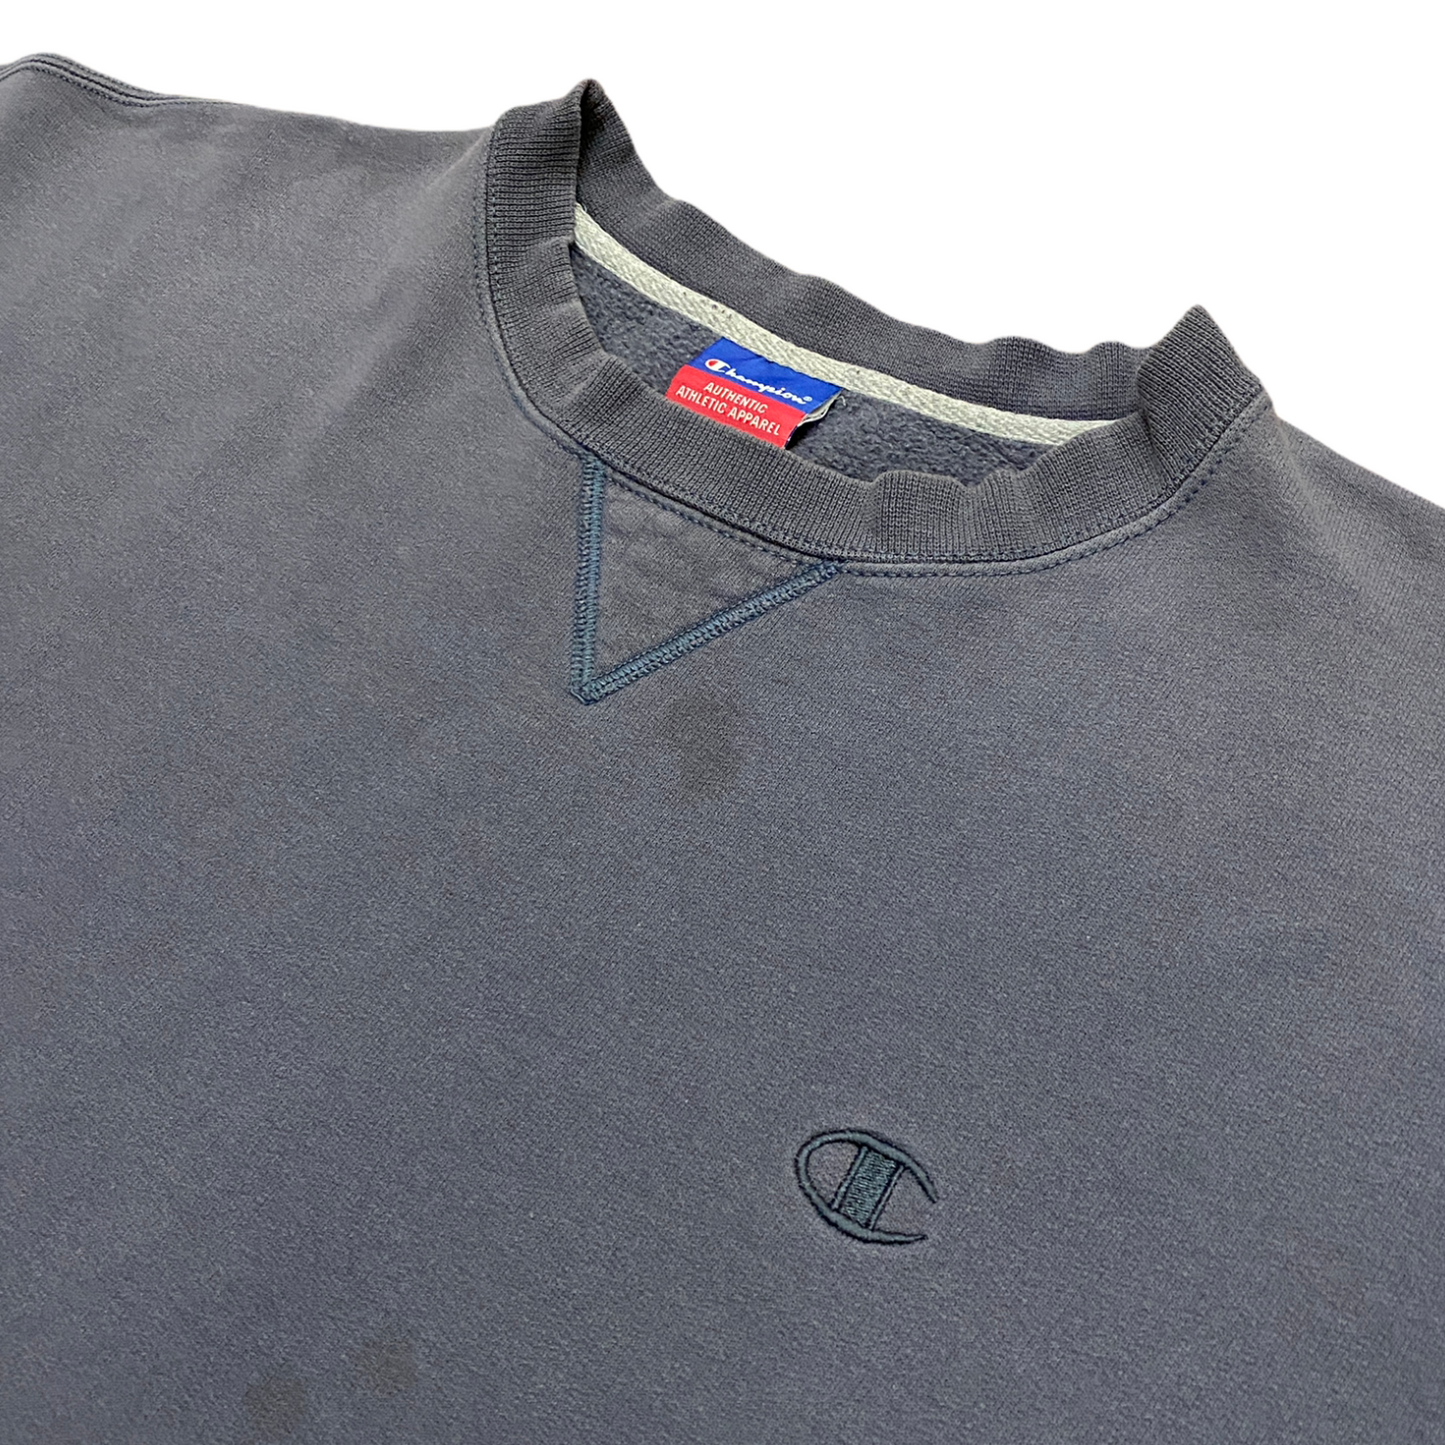 Champion washed out grey sweater (L)